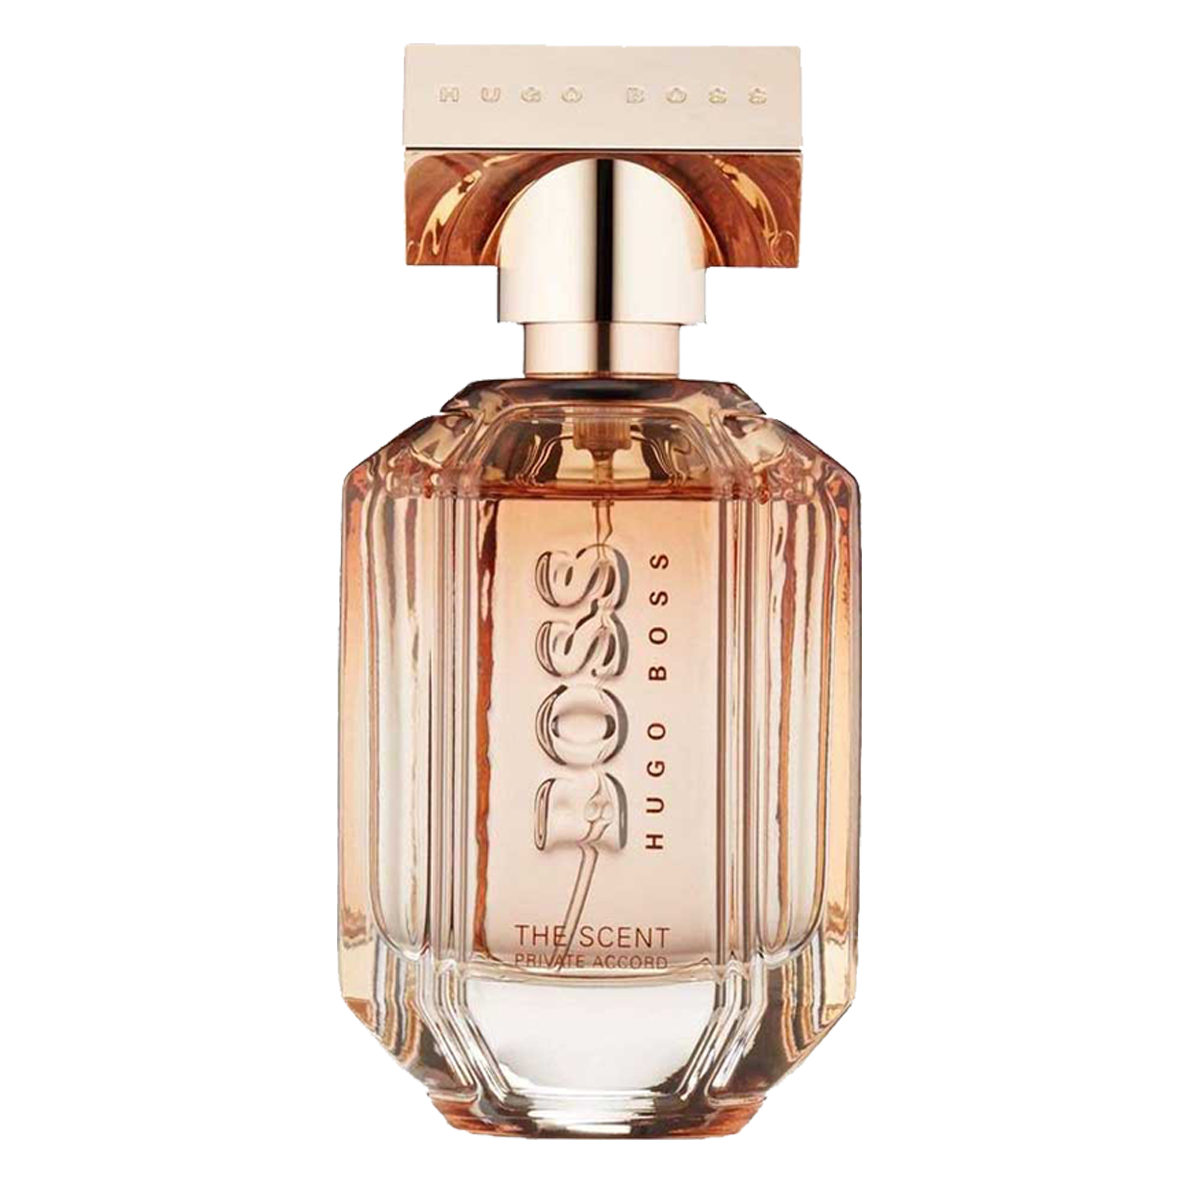 BOSS THE SCENT PRIVATE ACCORD PF EDP 100mL – Sentrum Pharmacy | lupon ...